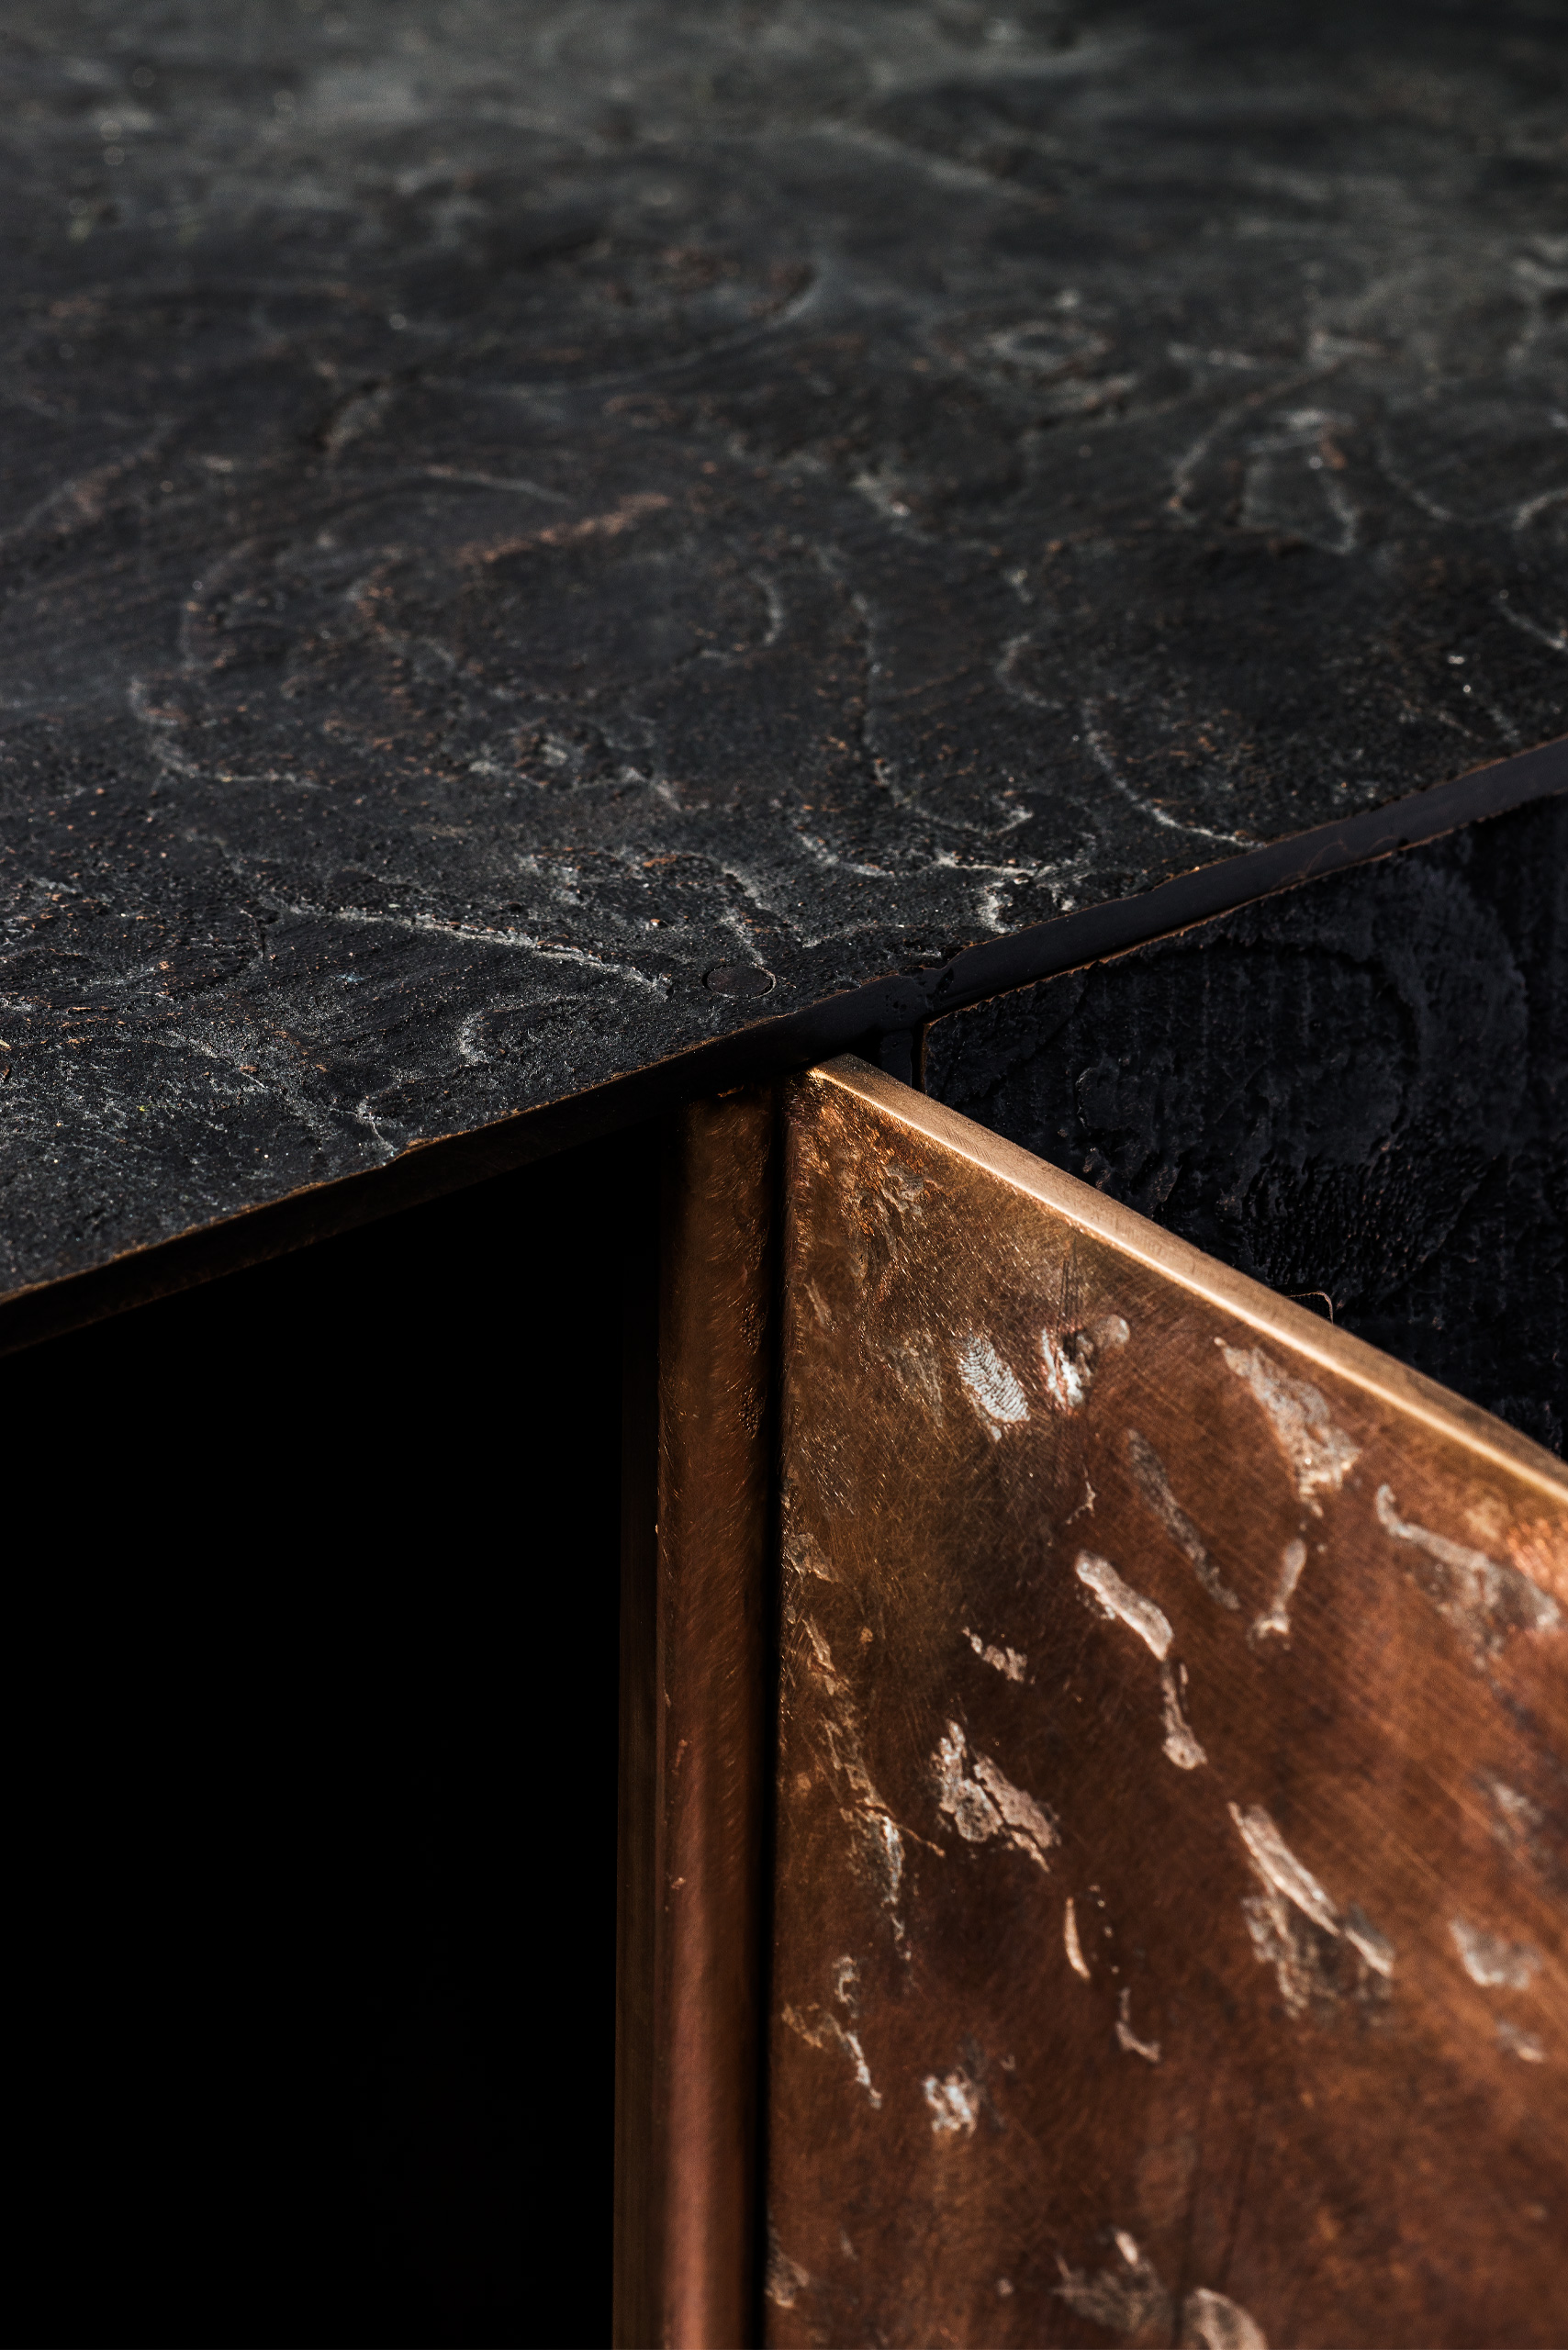 Damasco Cabinet in Bronze with Black Patina